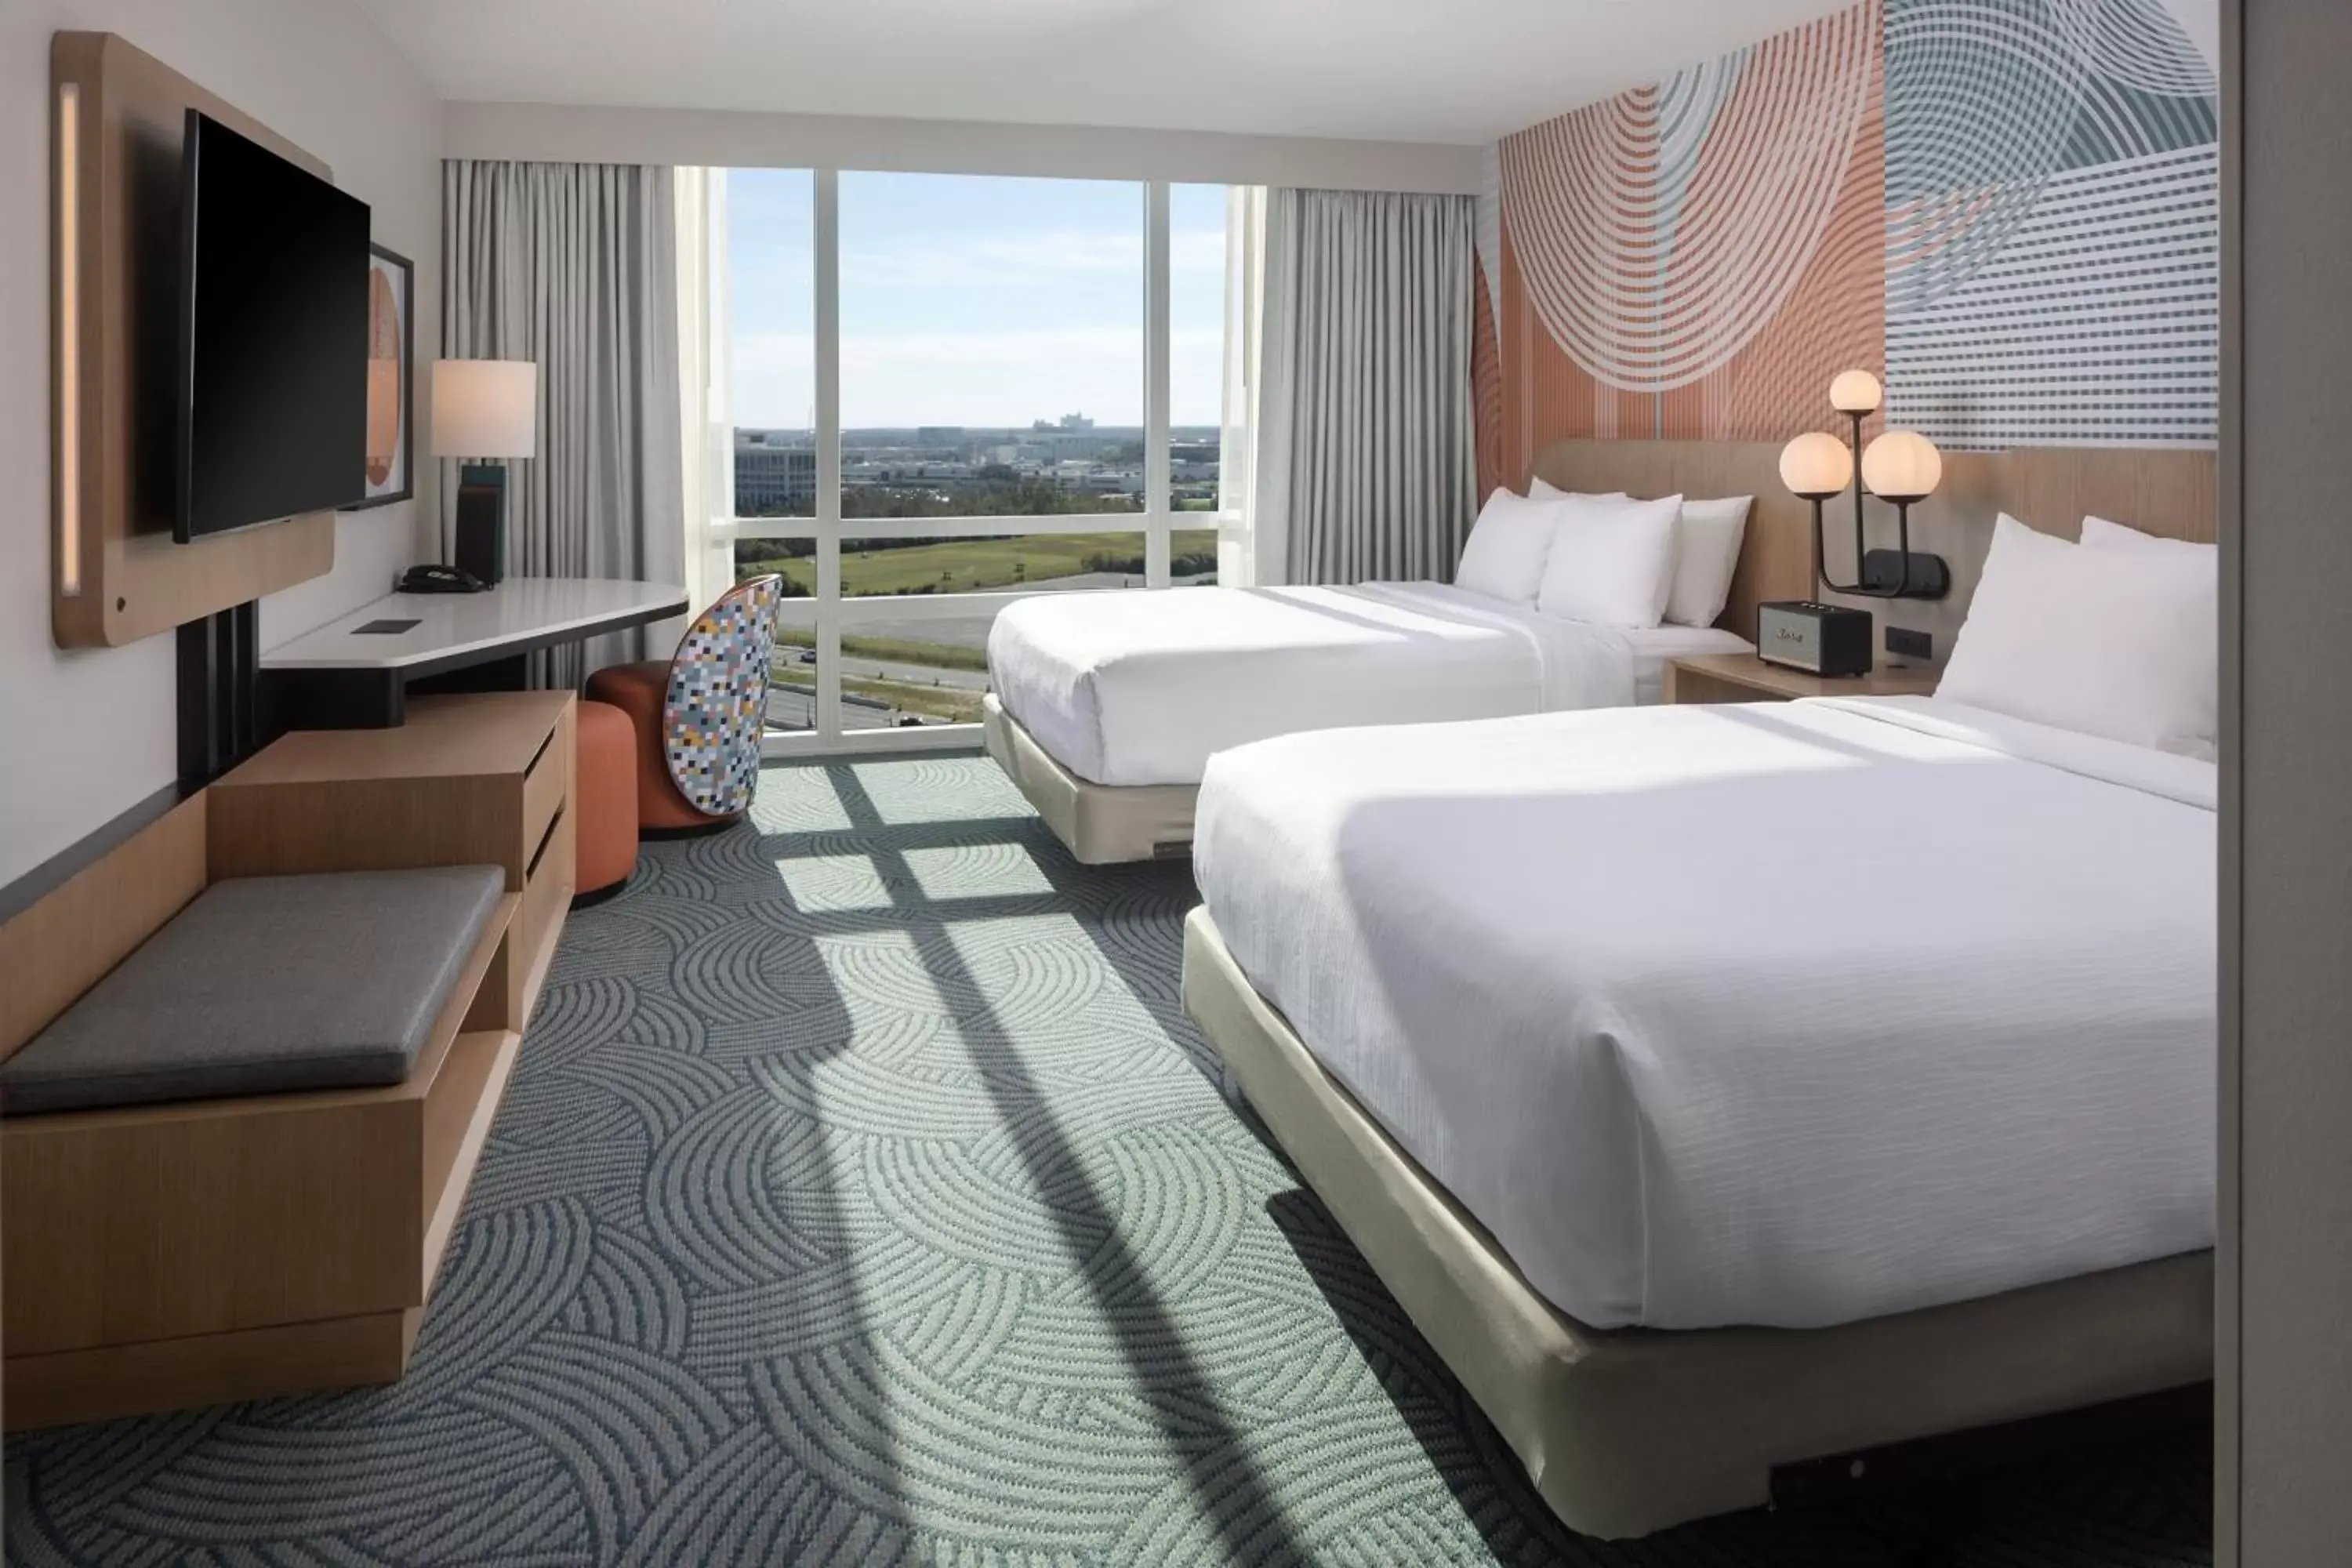 Deluxe Queen Room with Two Queen Beds and Skyline View in Hotel Kinetic Orlando Universal Blvd